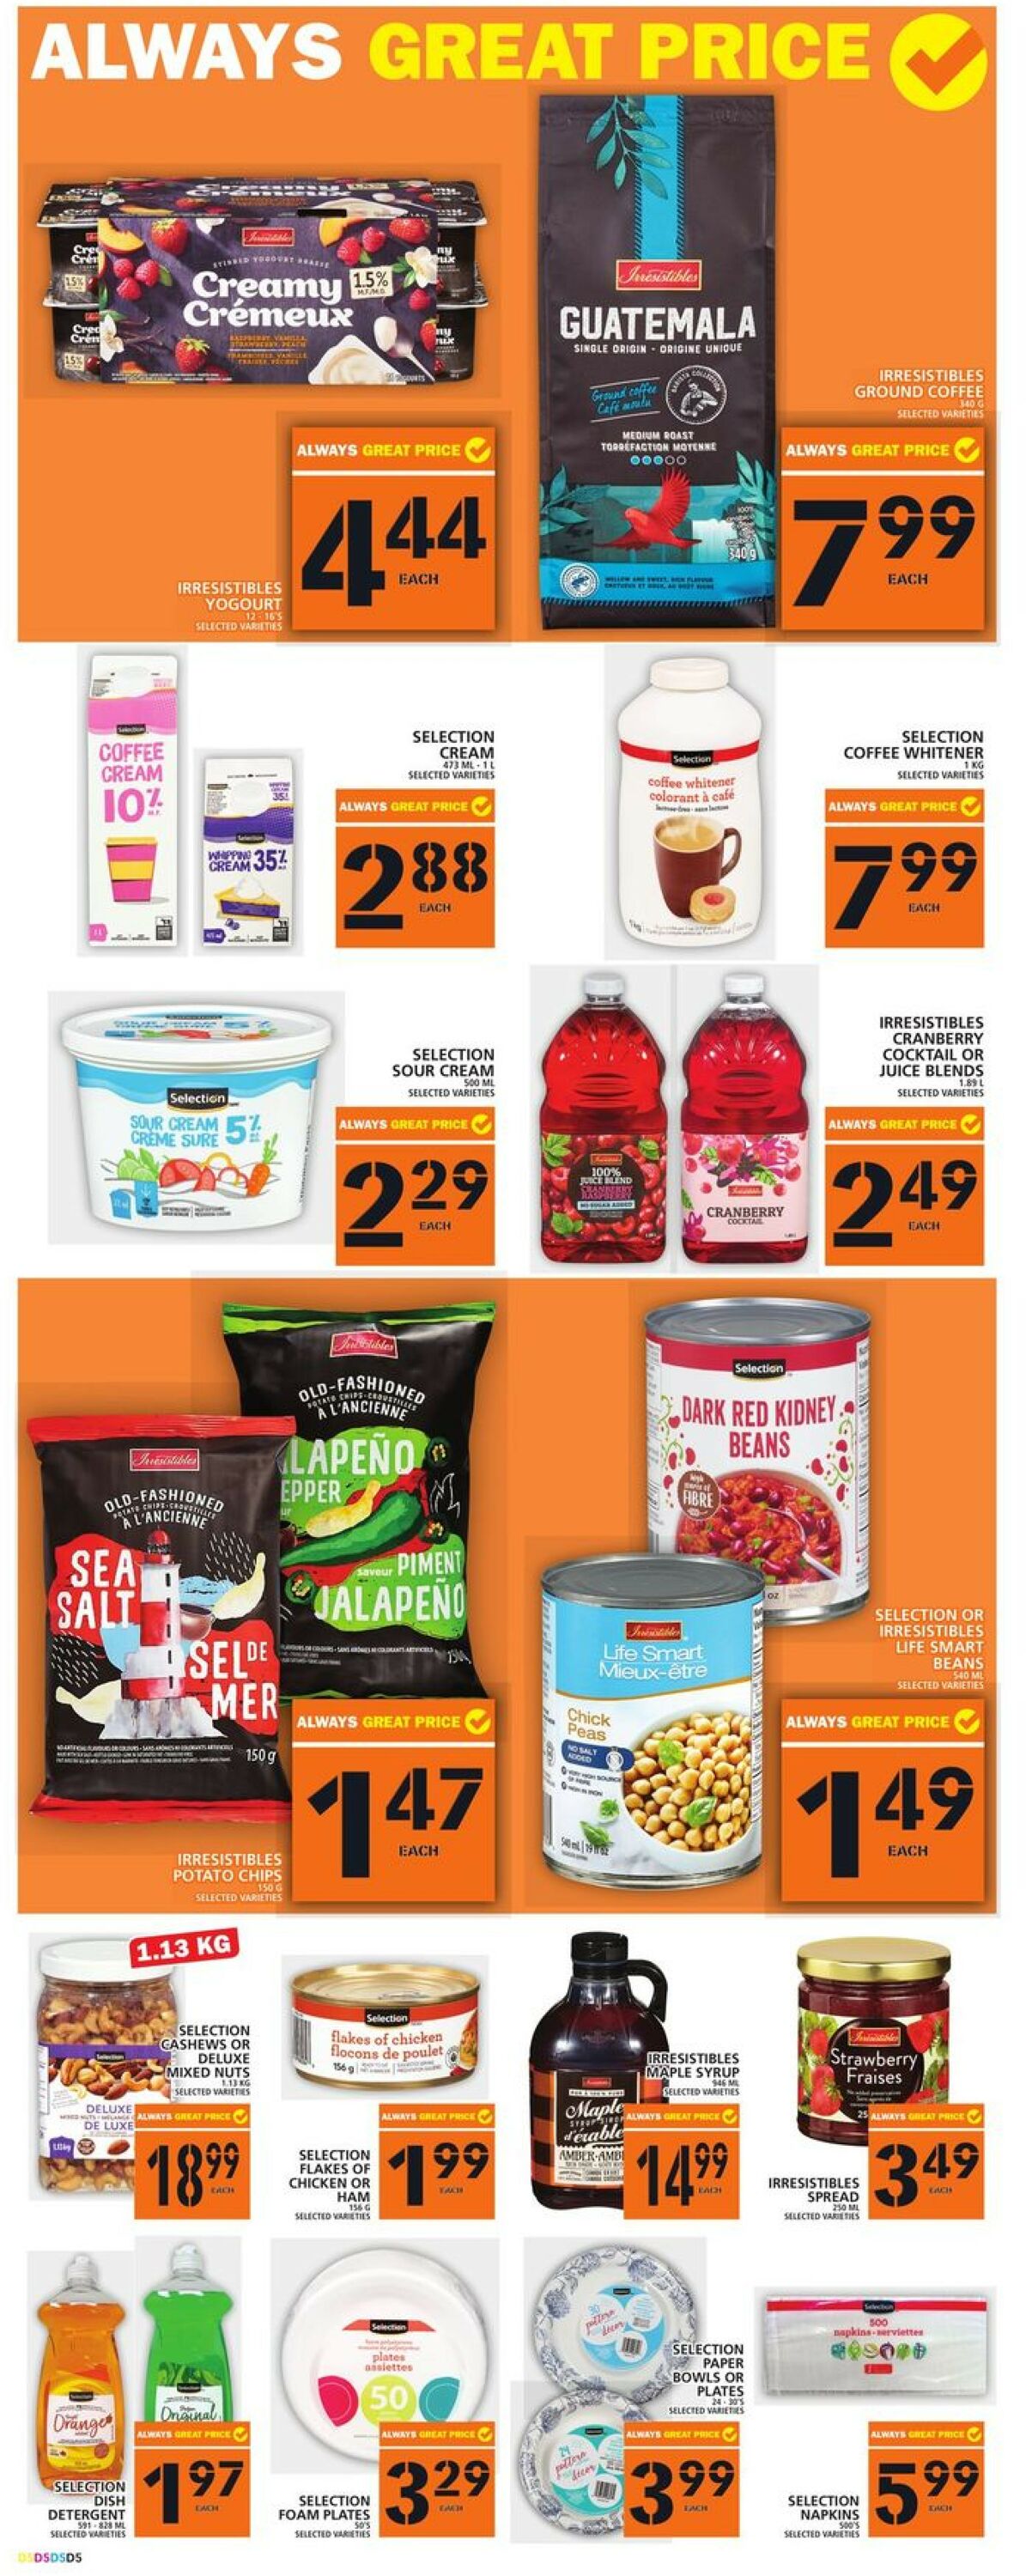 Food Basics Flyer from 11/17/2022